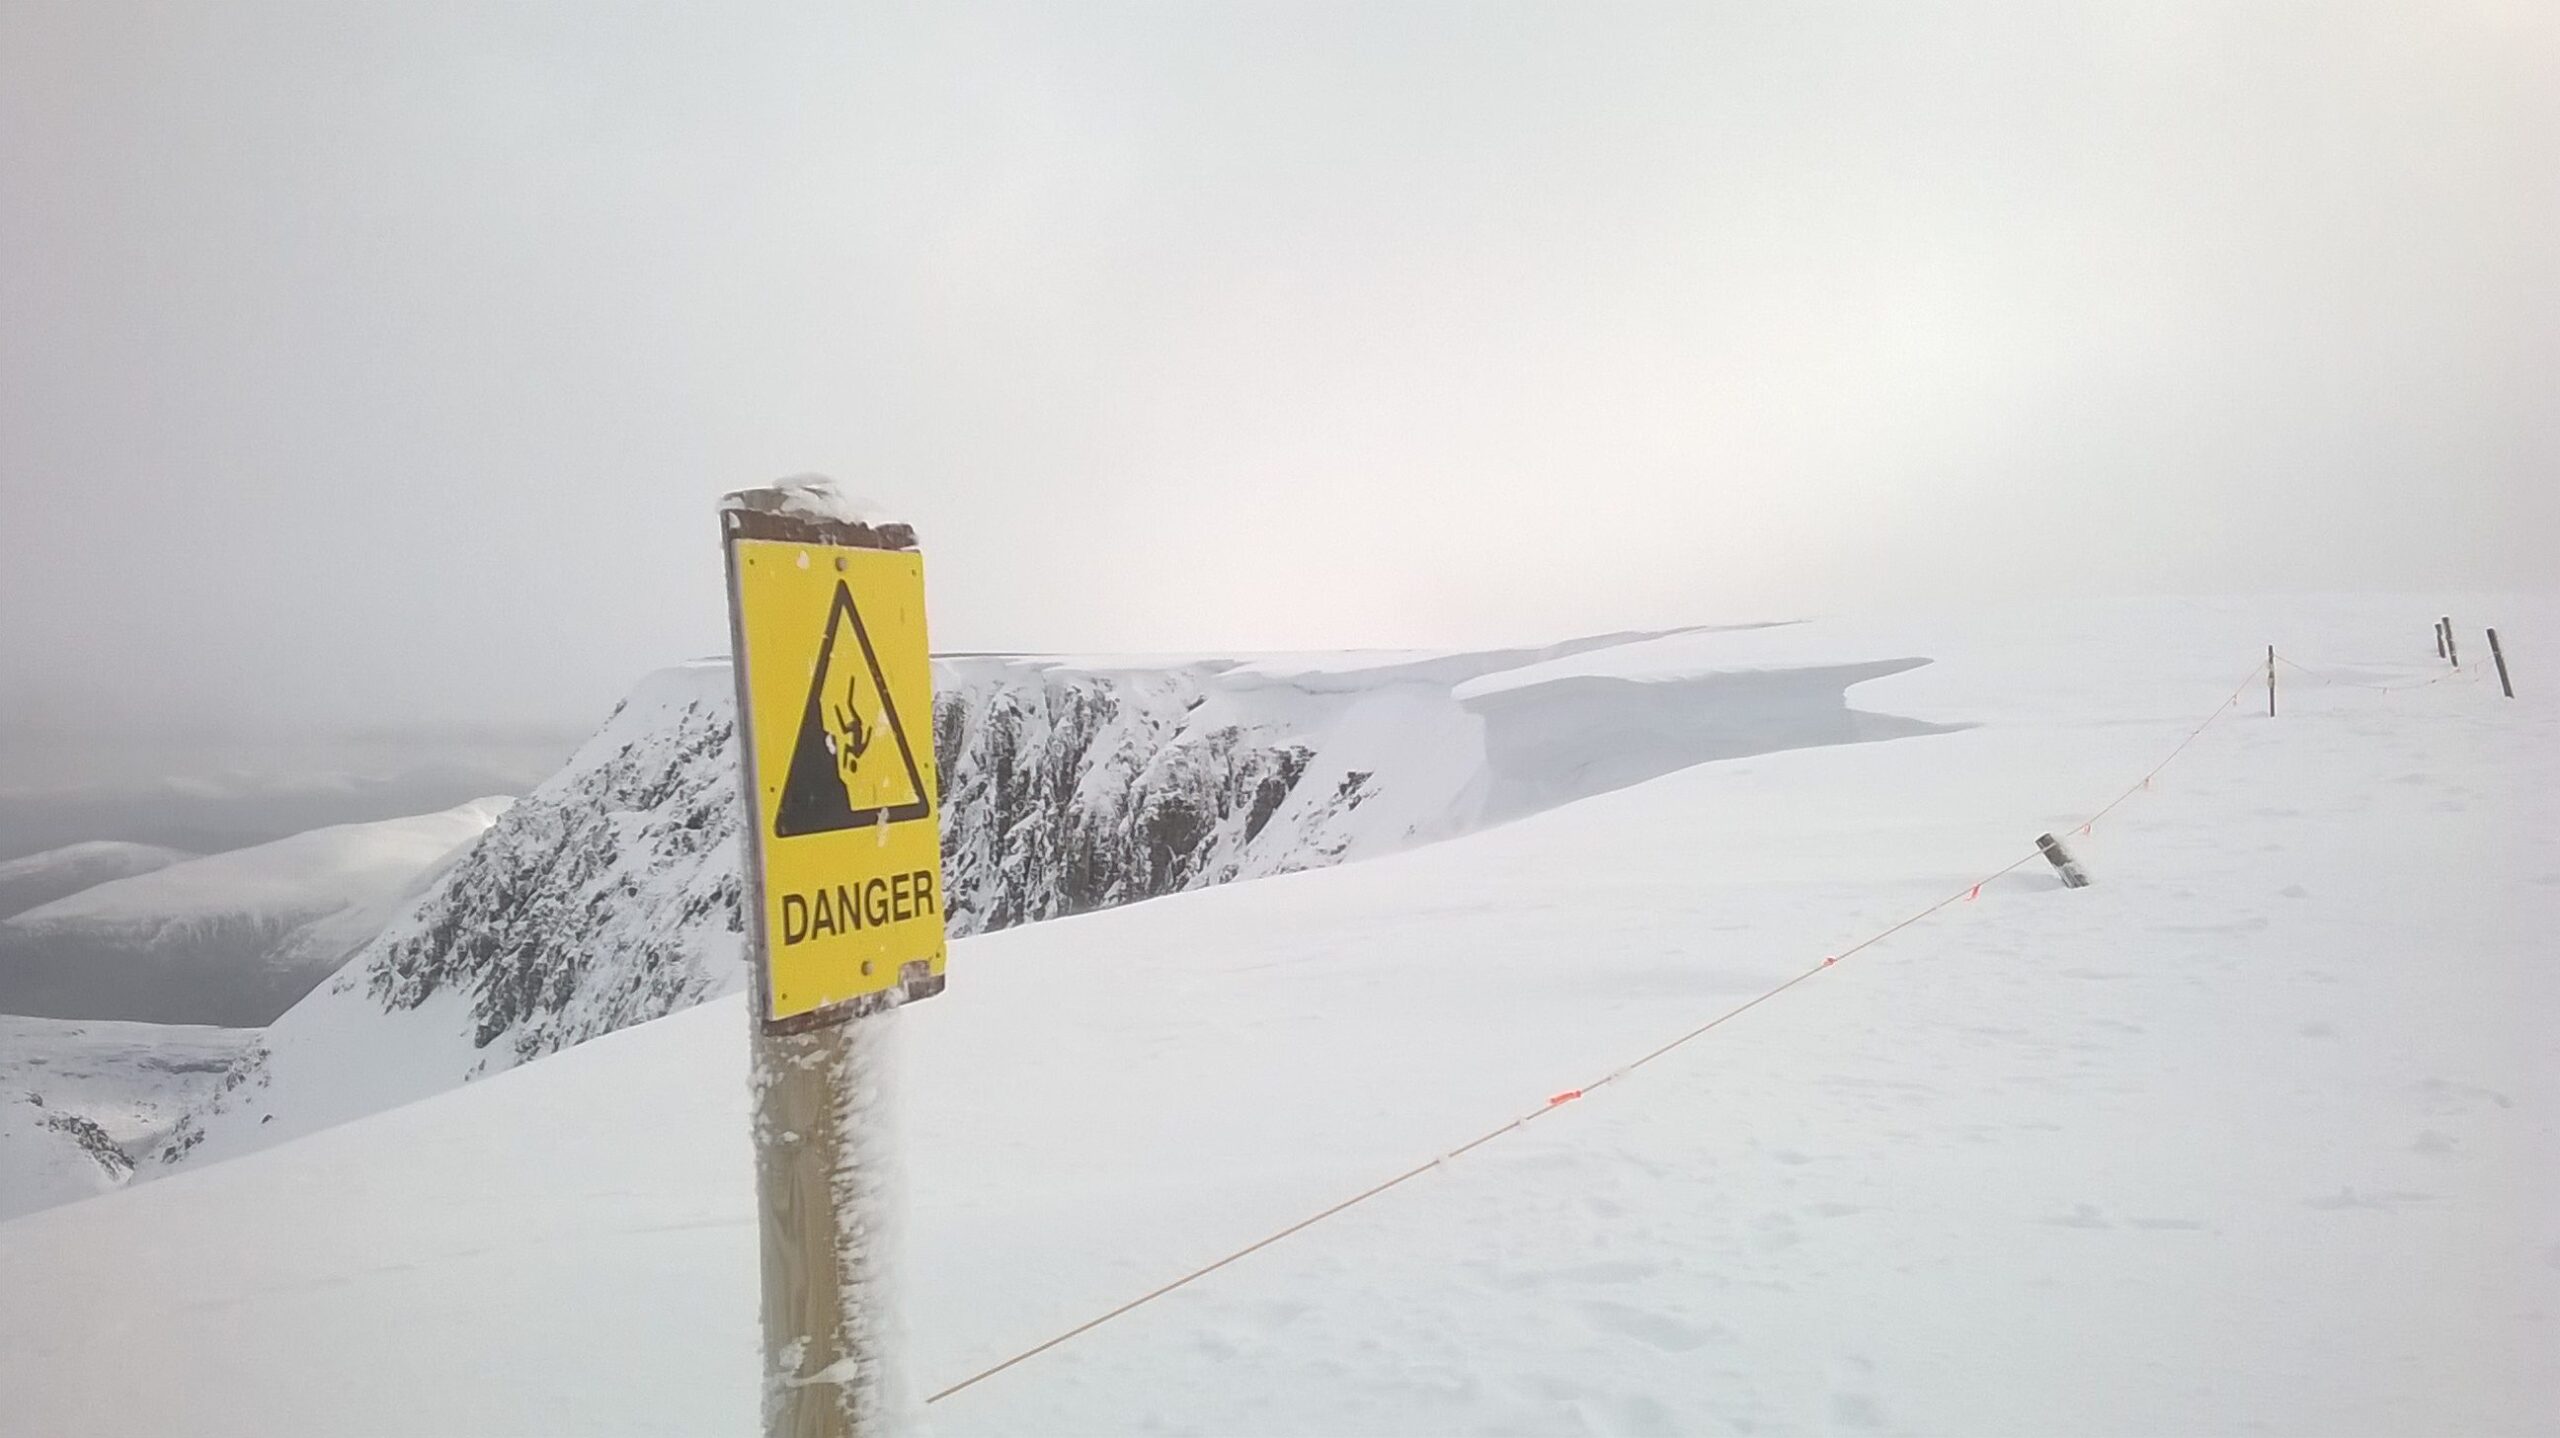 A danger sign on a snowy cliff